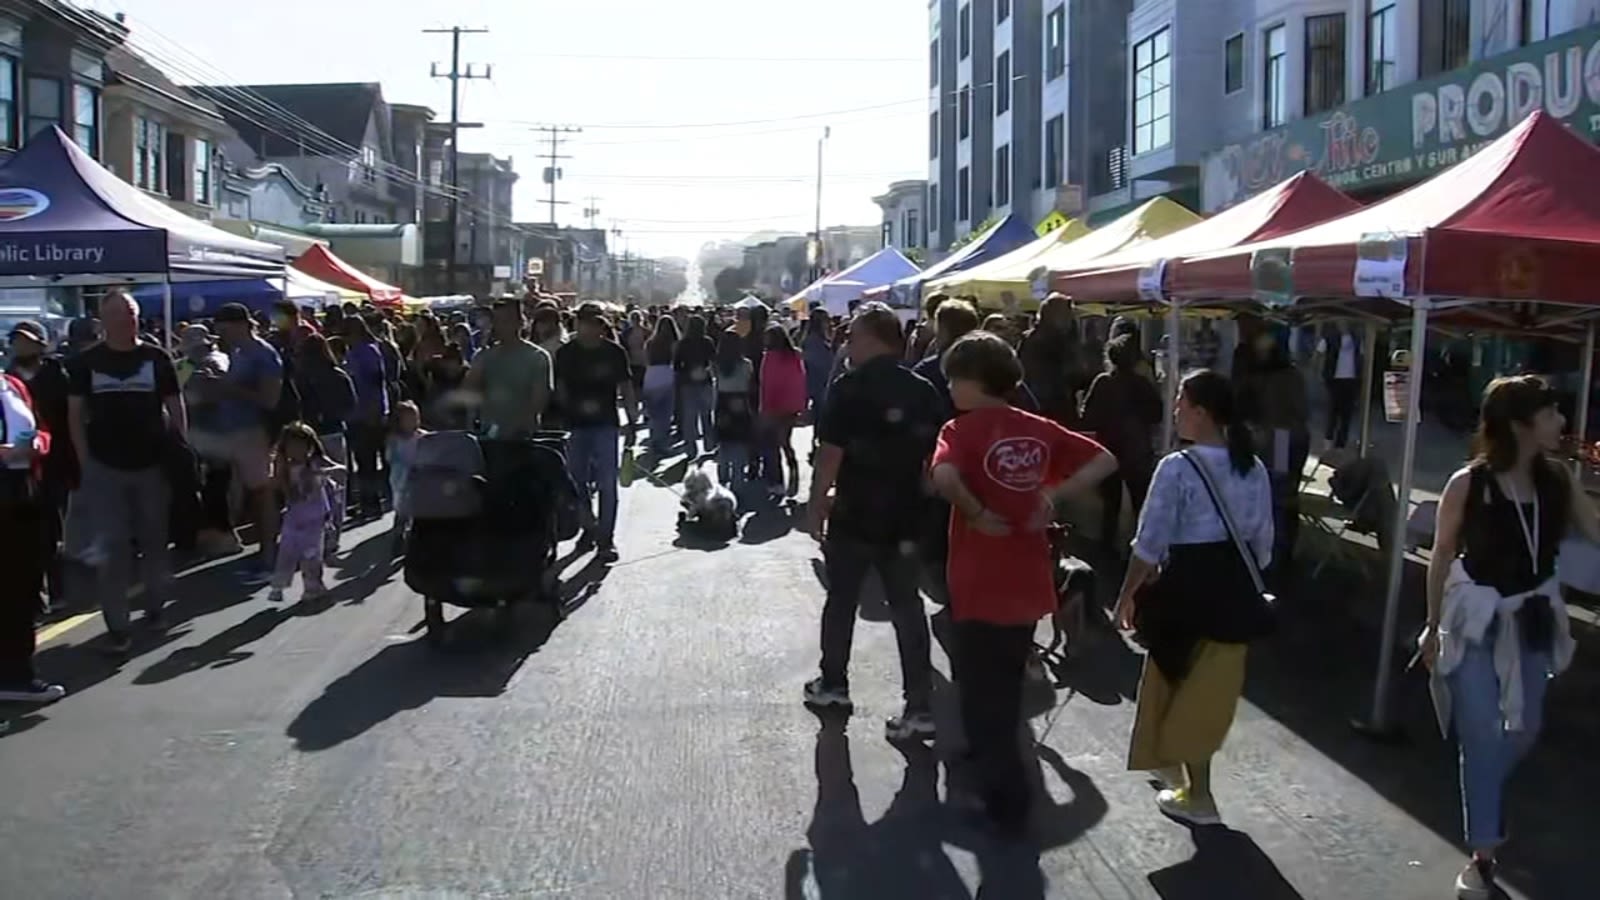 SF night markets aim to help revitalize city by taking it to the streets